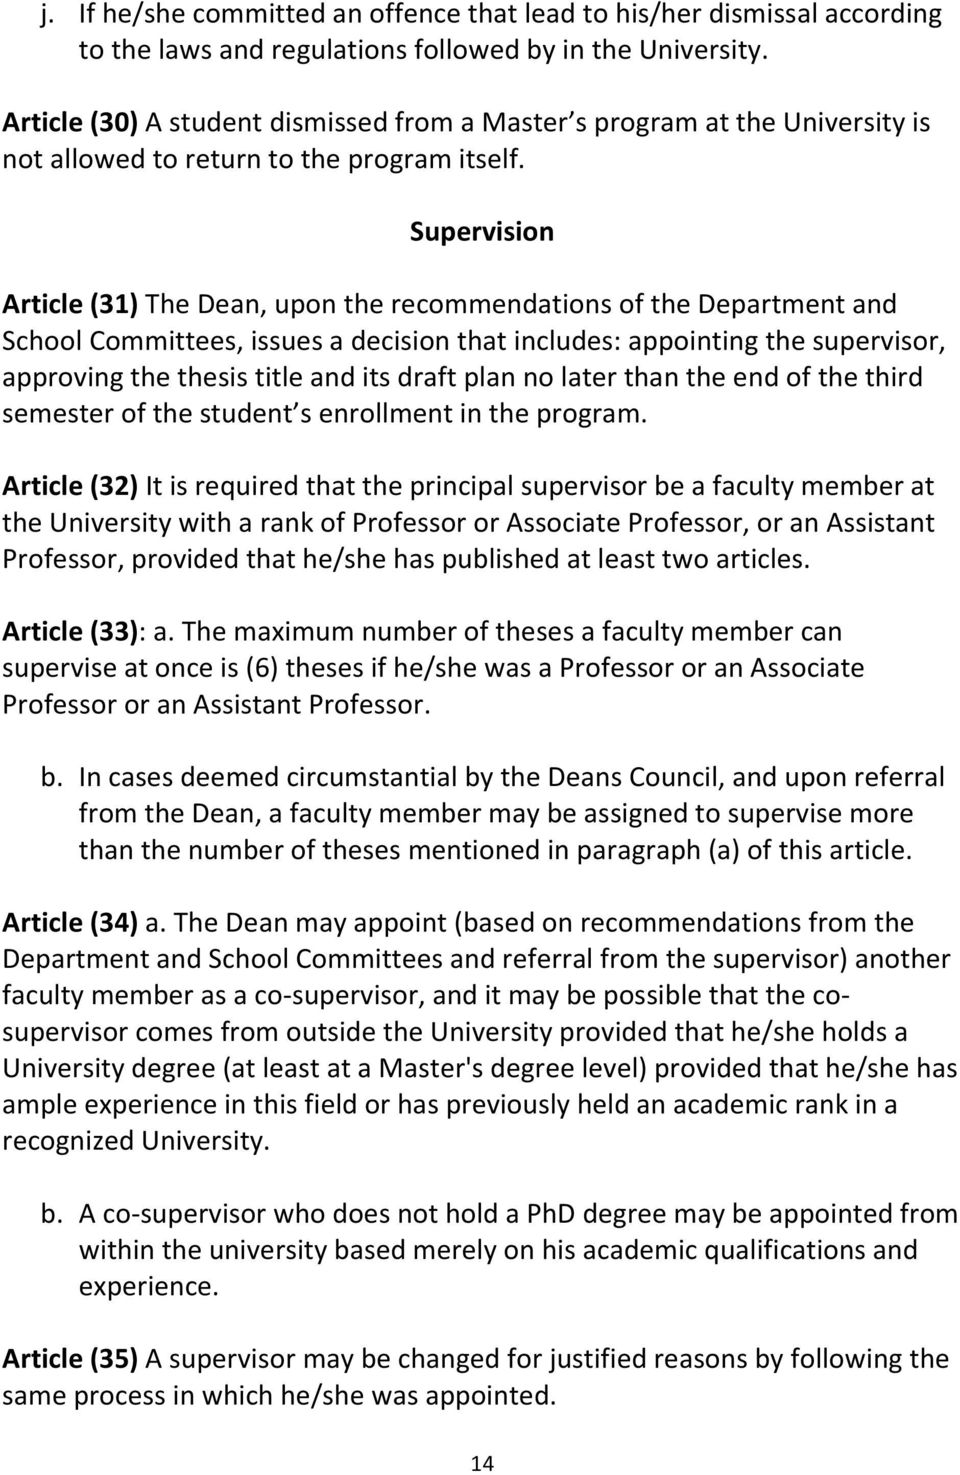 Supervision Article (31) The Dean, upon the recommendations of the Department and School Committees, issues a decision that includes: appointing the supervisor, approving the thesis title and its